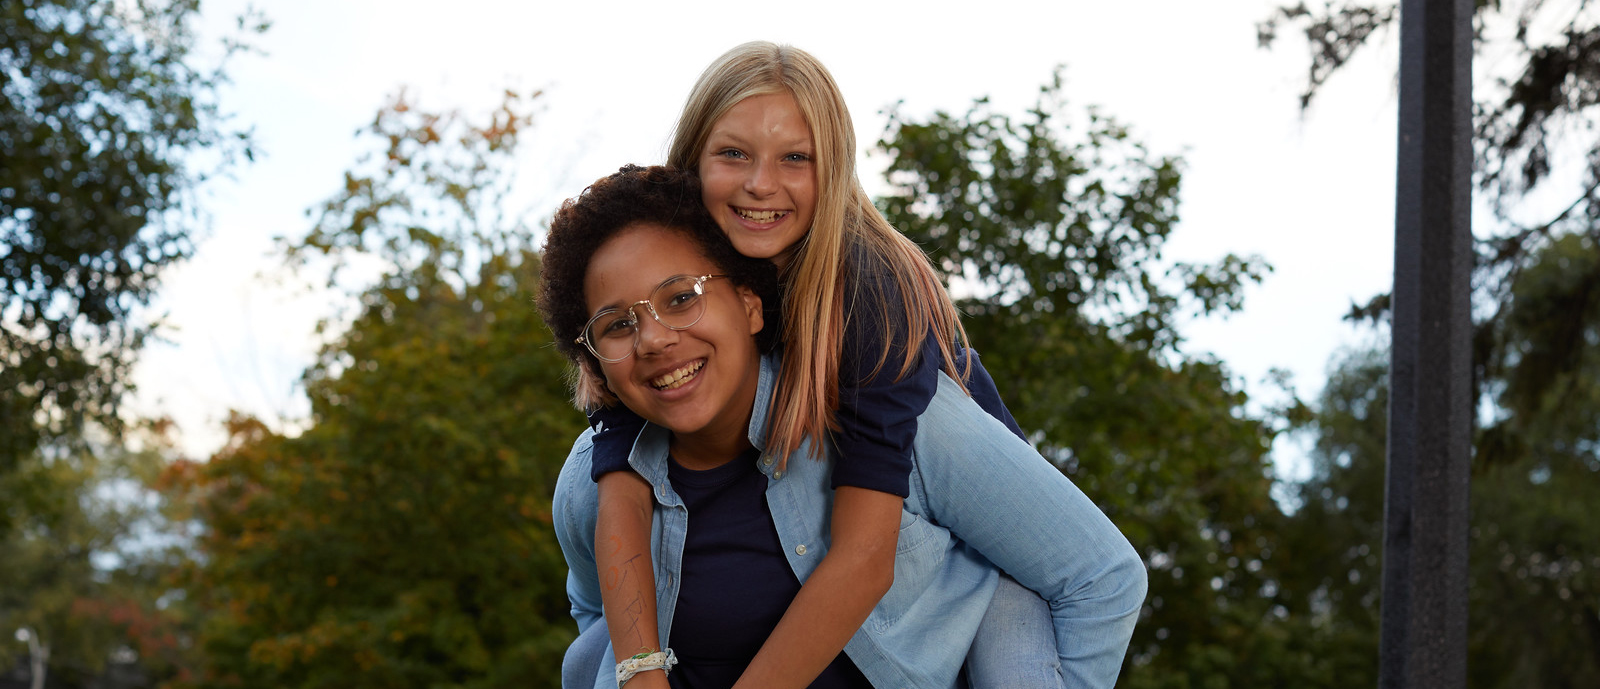 Two Girl Guides ages 12 to 14 outside at a park with one girl giving the other a piggy back ride